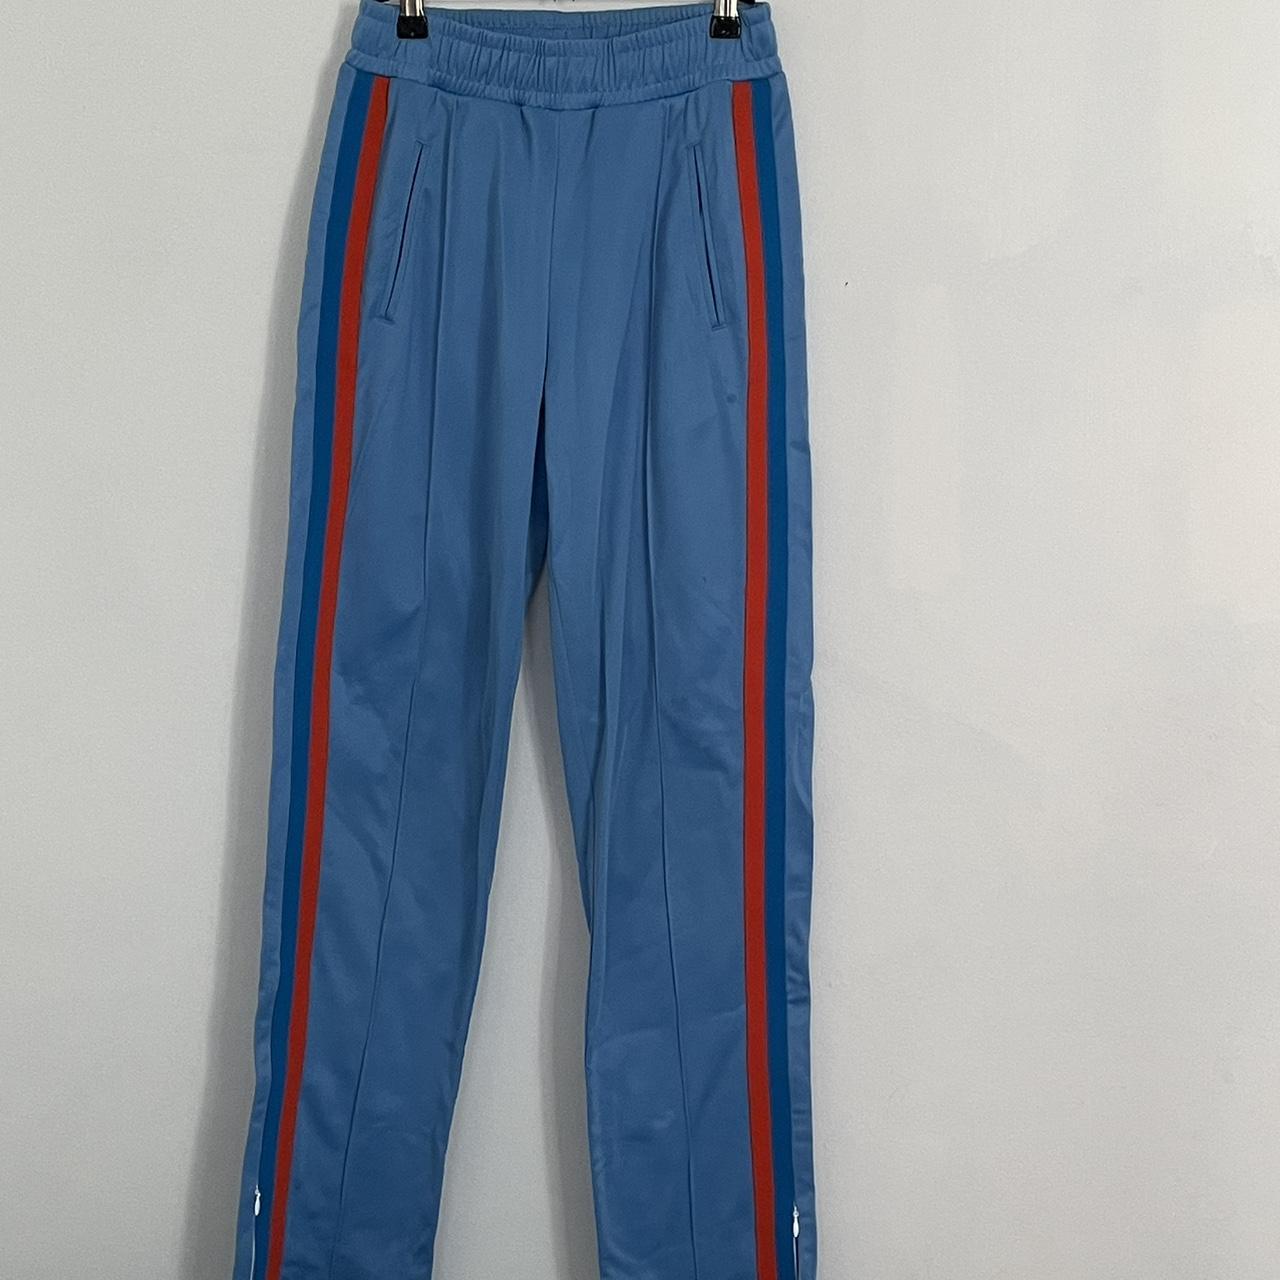 KULE Women's Blue and Red Trousers